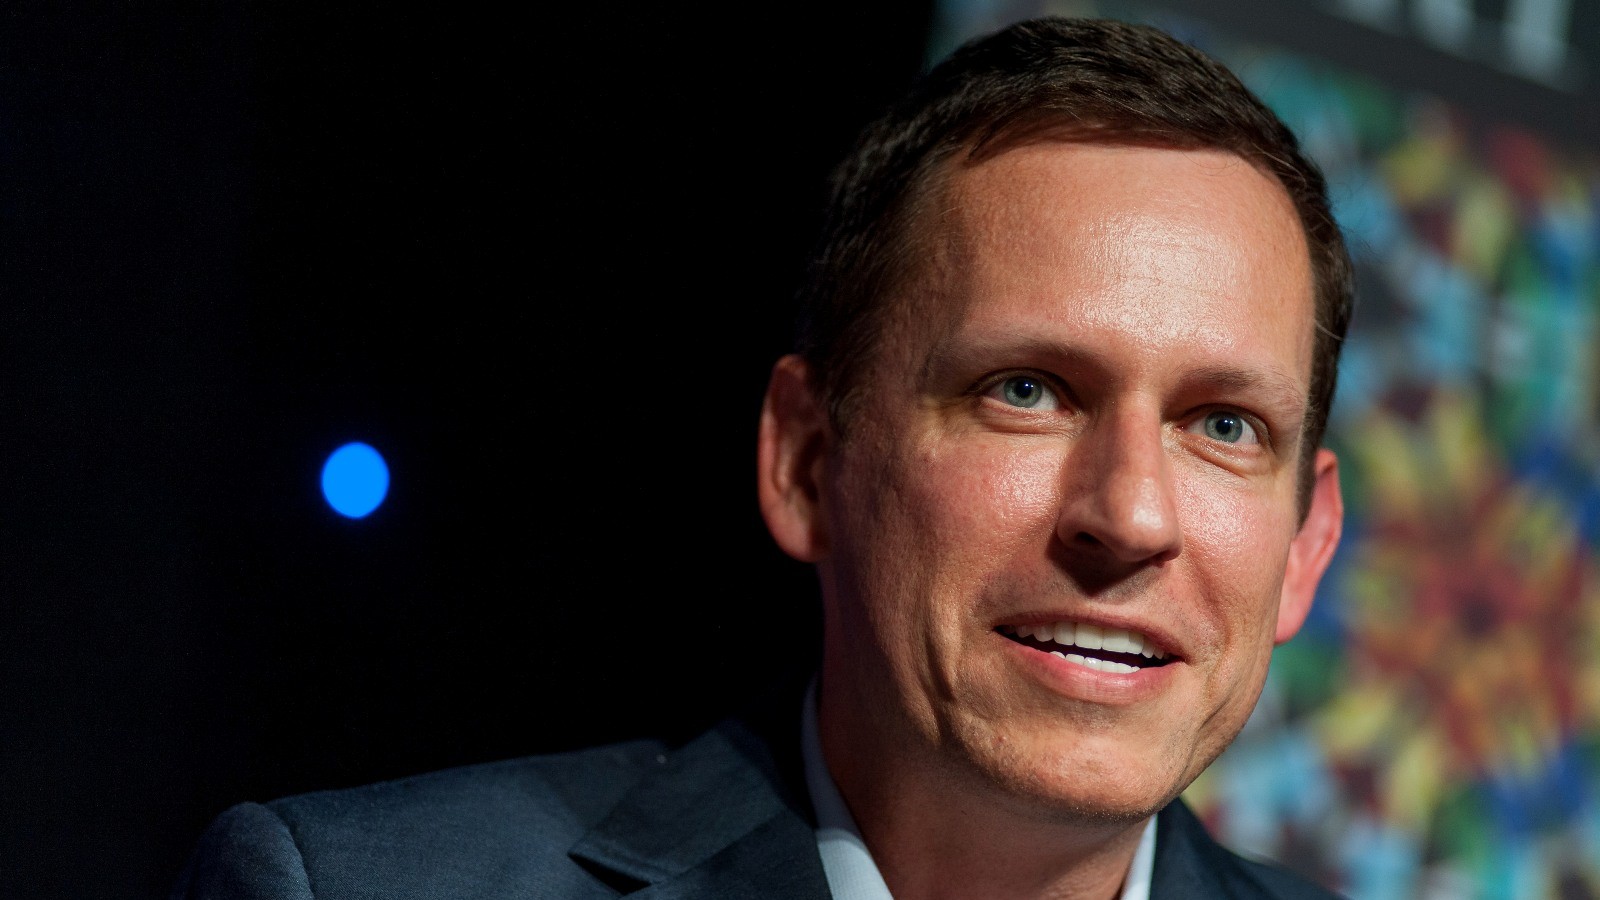 peter_thiel_from_fortune_live_media-e1410971290253